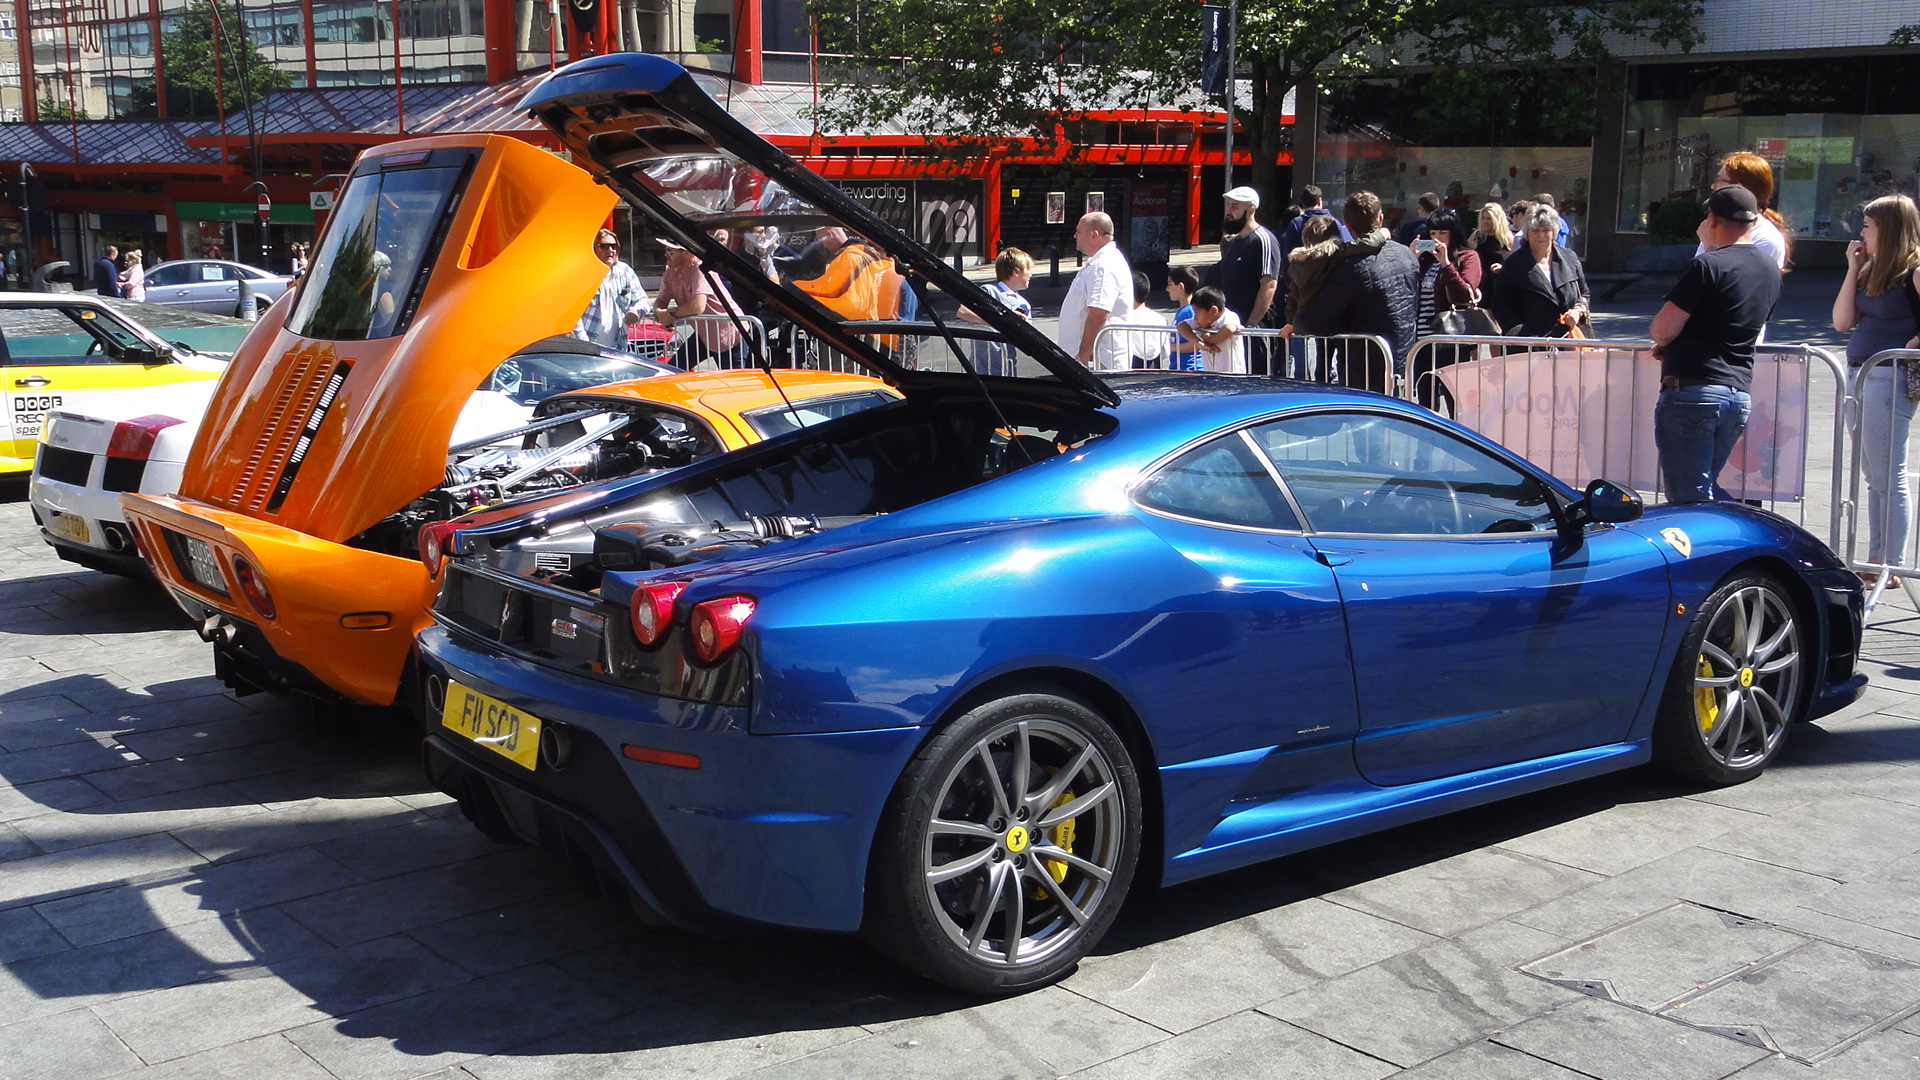 Supercars in the City - Sheffield 29th July.Passenger Rides! - Page 1 - Yorkshire - PistonHeads